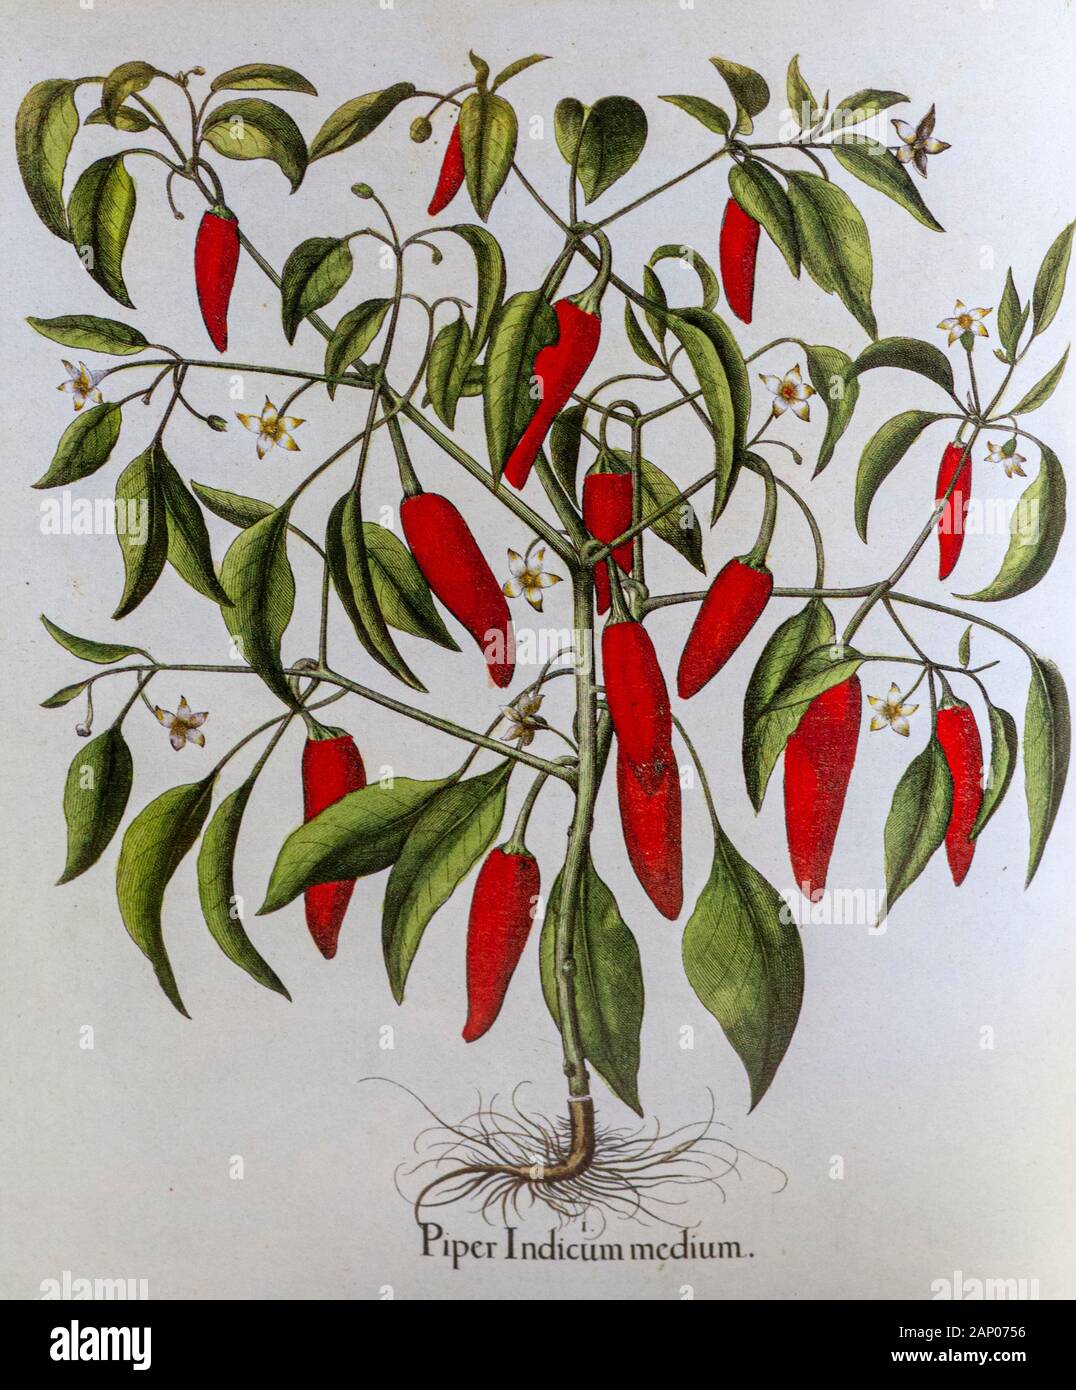 Hand painted Capsicum annuum (Red Pepper) from Hortus Eystettensis, a codex produced by Basilius Besler in 1613 of the garden of the bishop of Eichstä Stock Photo